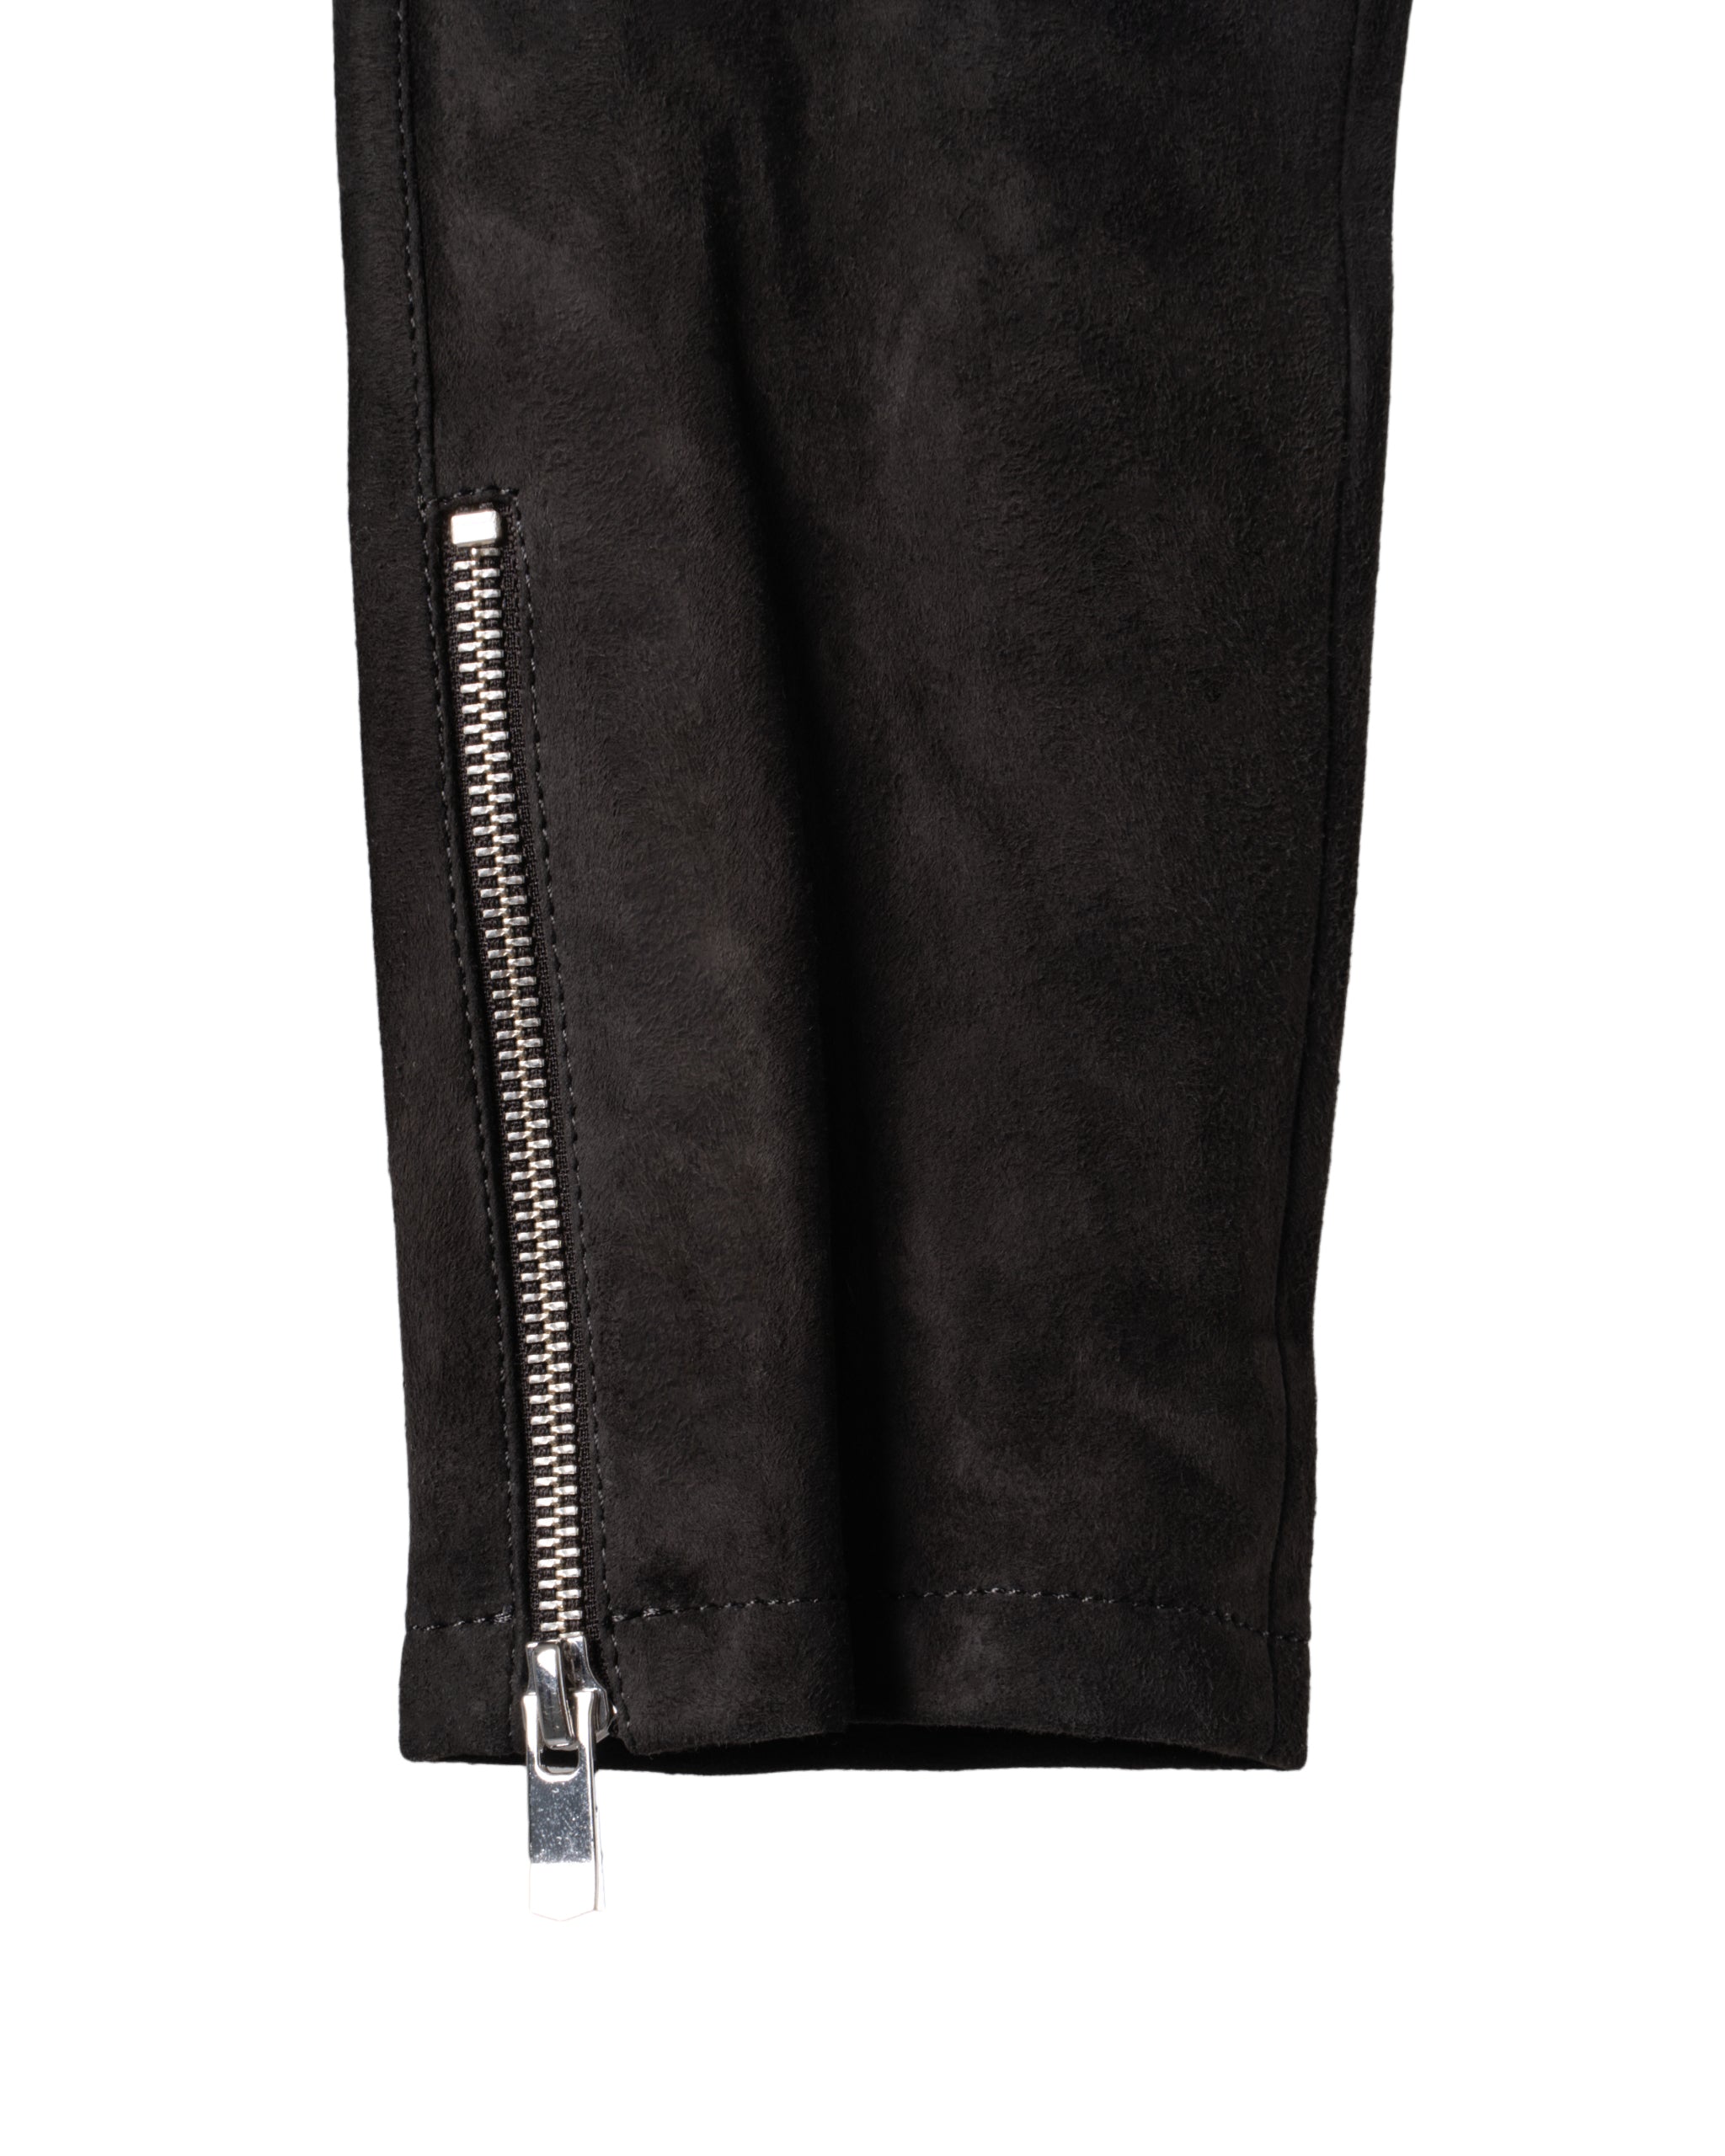 SUEDE-STRETCH LEATHER BIKER PANTS